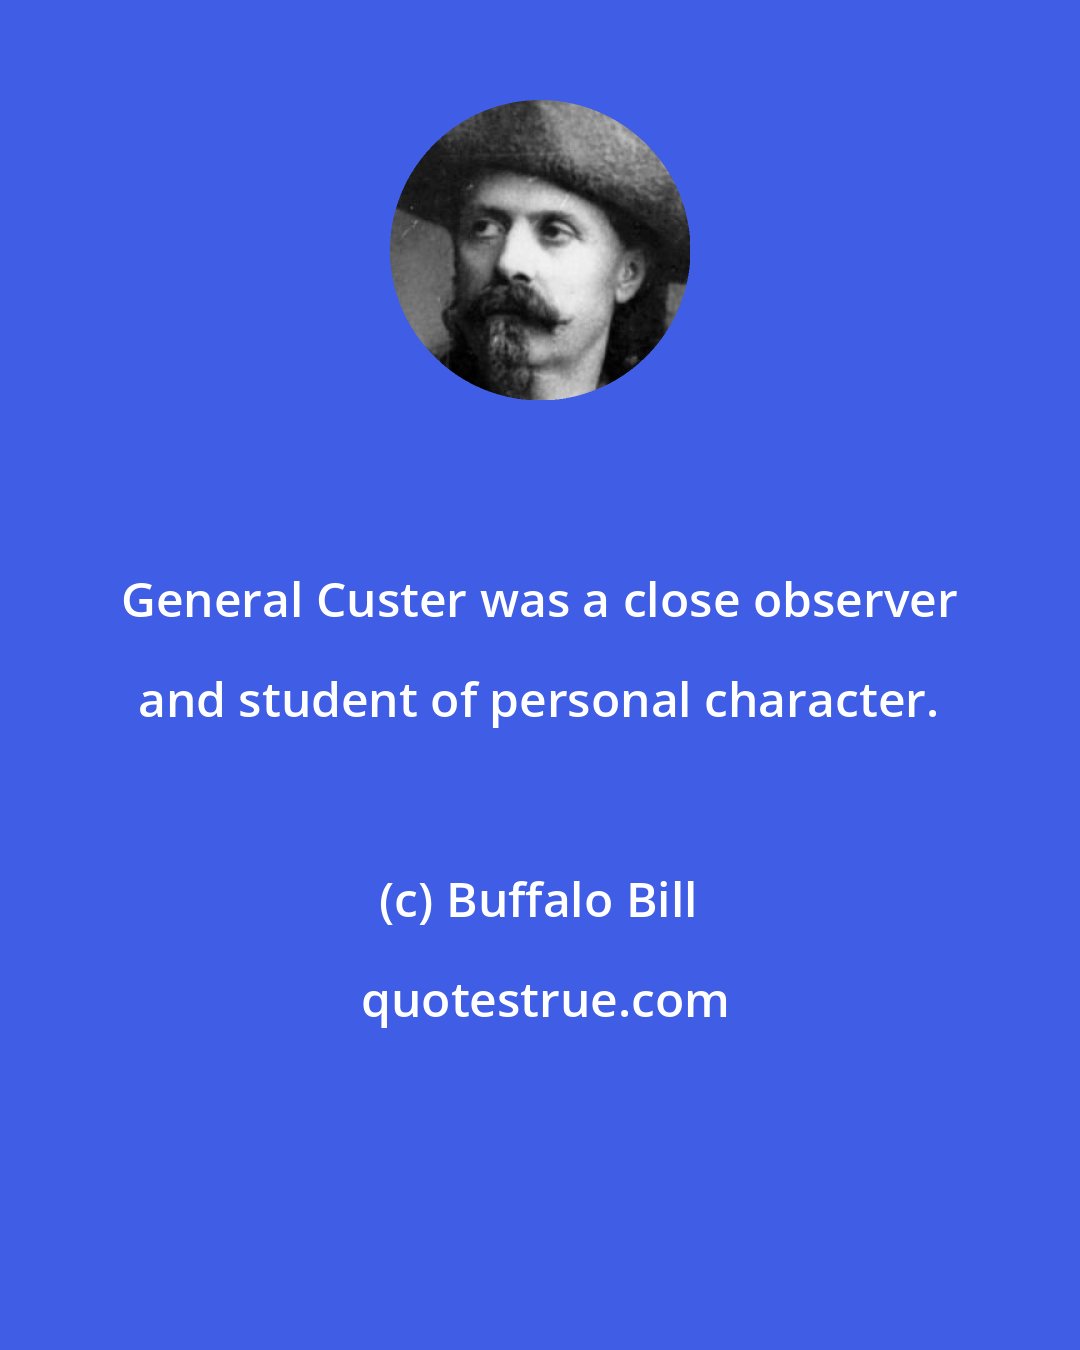 Buffalo Bill: General Custer was a close observer and student of personal character.